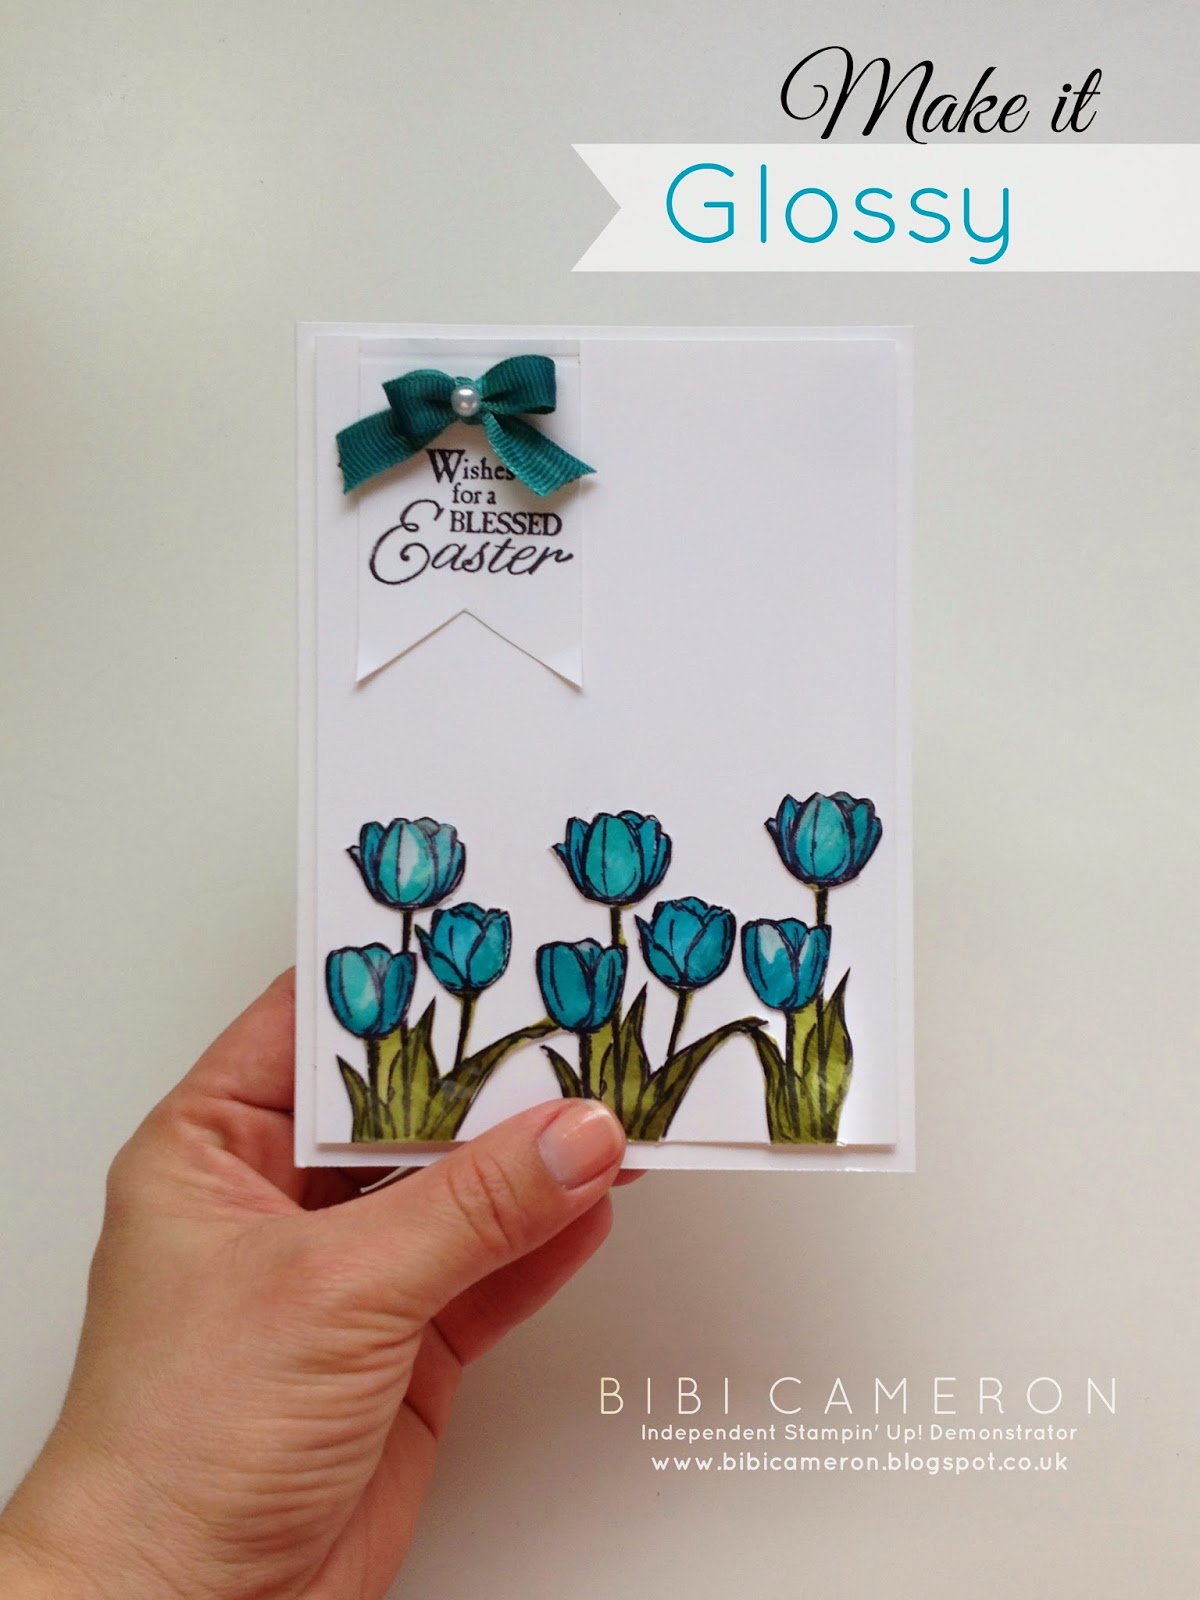 GLOSSY IMAGE STAMPING TECHNIQUE ♥ BLESSED EASTER STAMP FROM STAMPIN UP